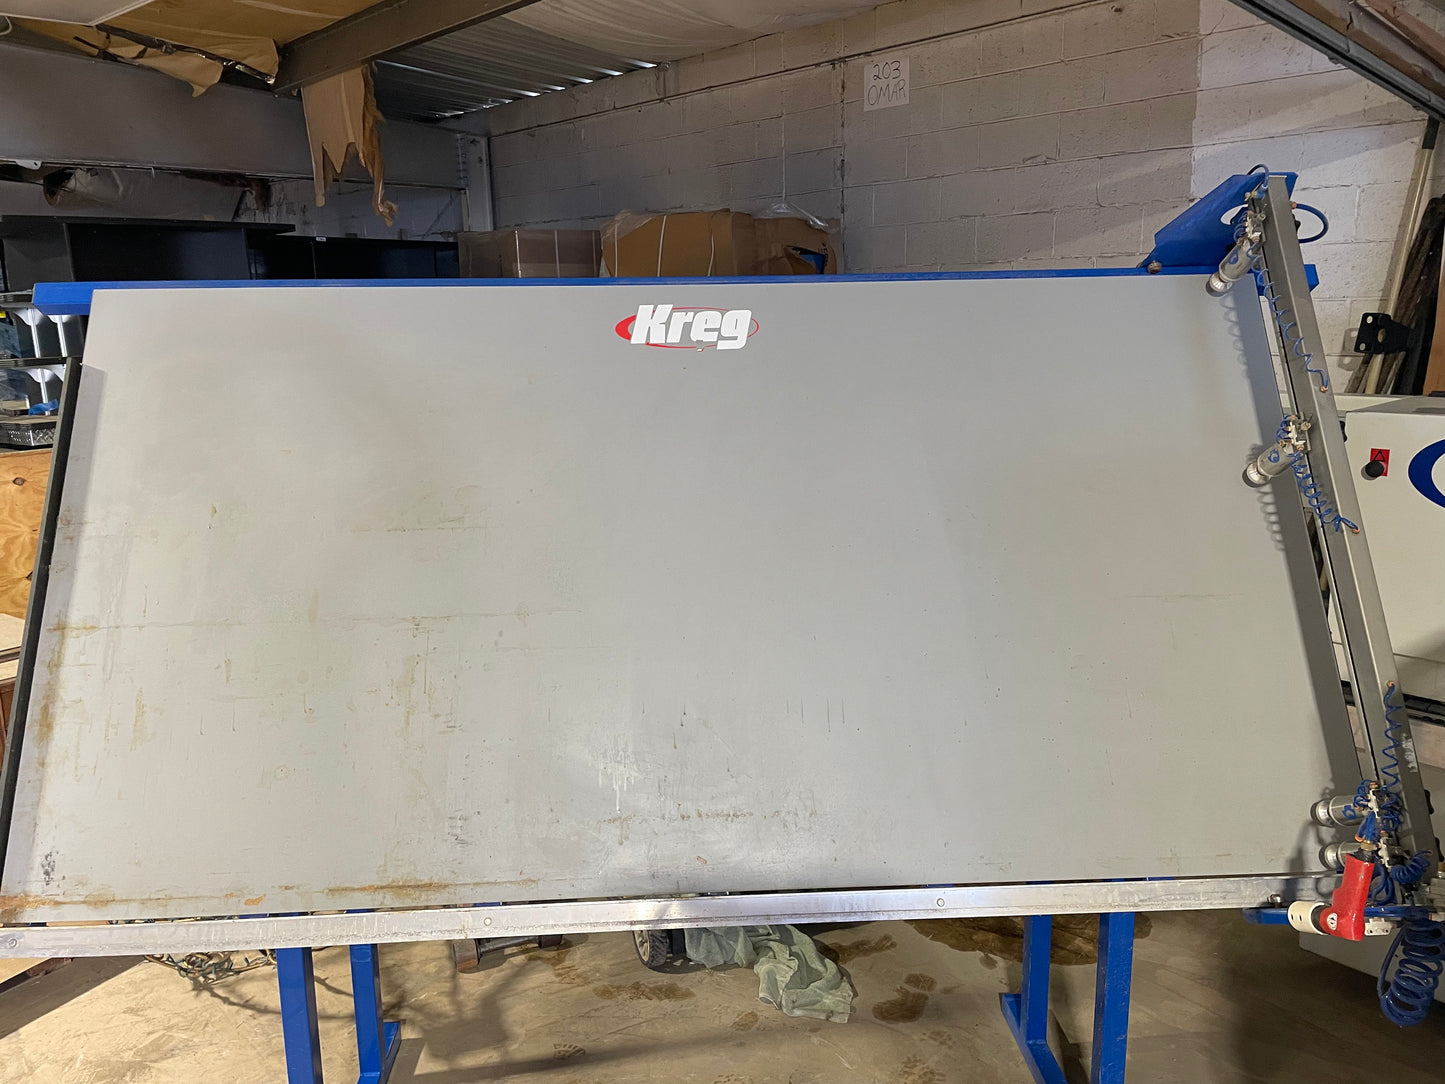 Kreg Faceframe Table with 4 Pistons - Texas